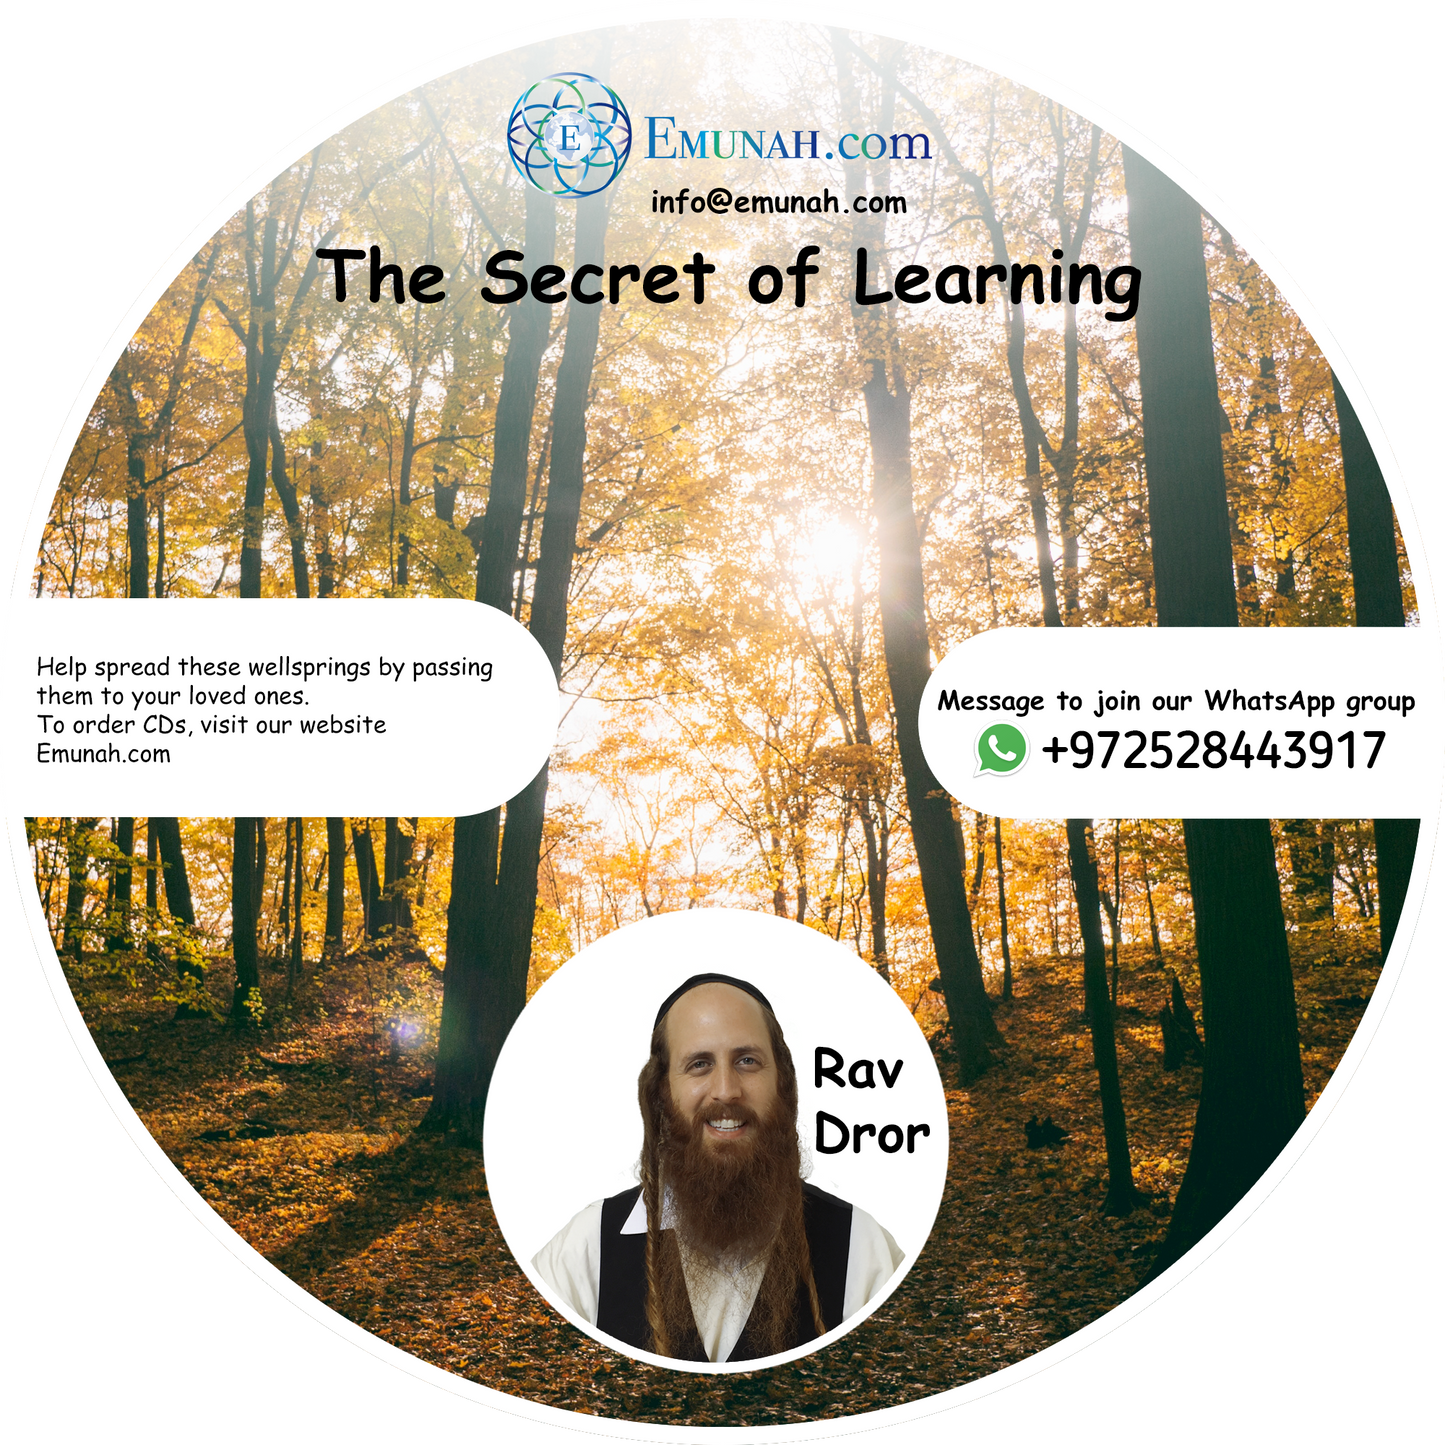 The Secret of Learning